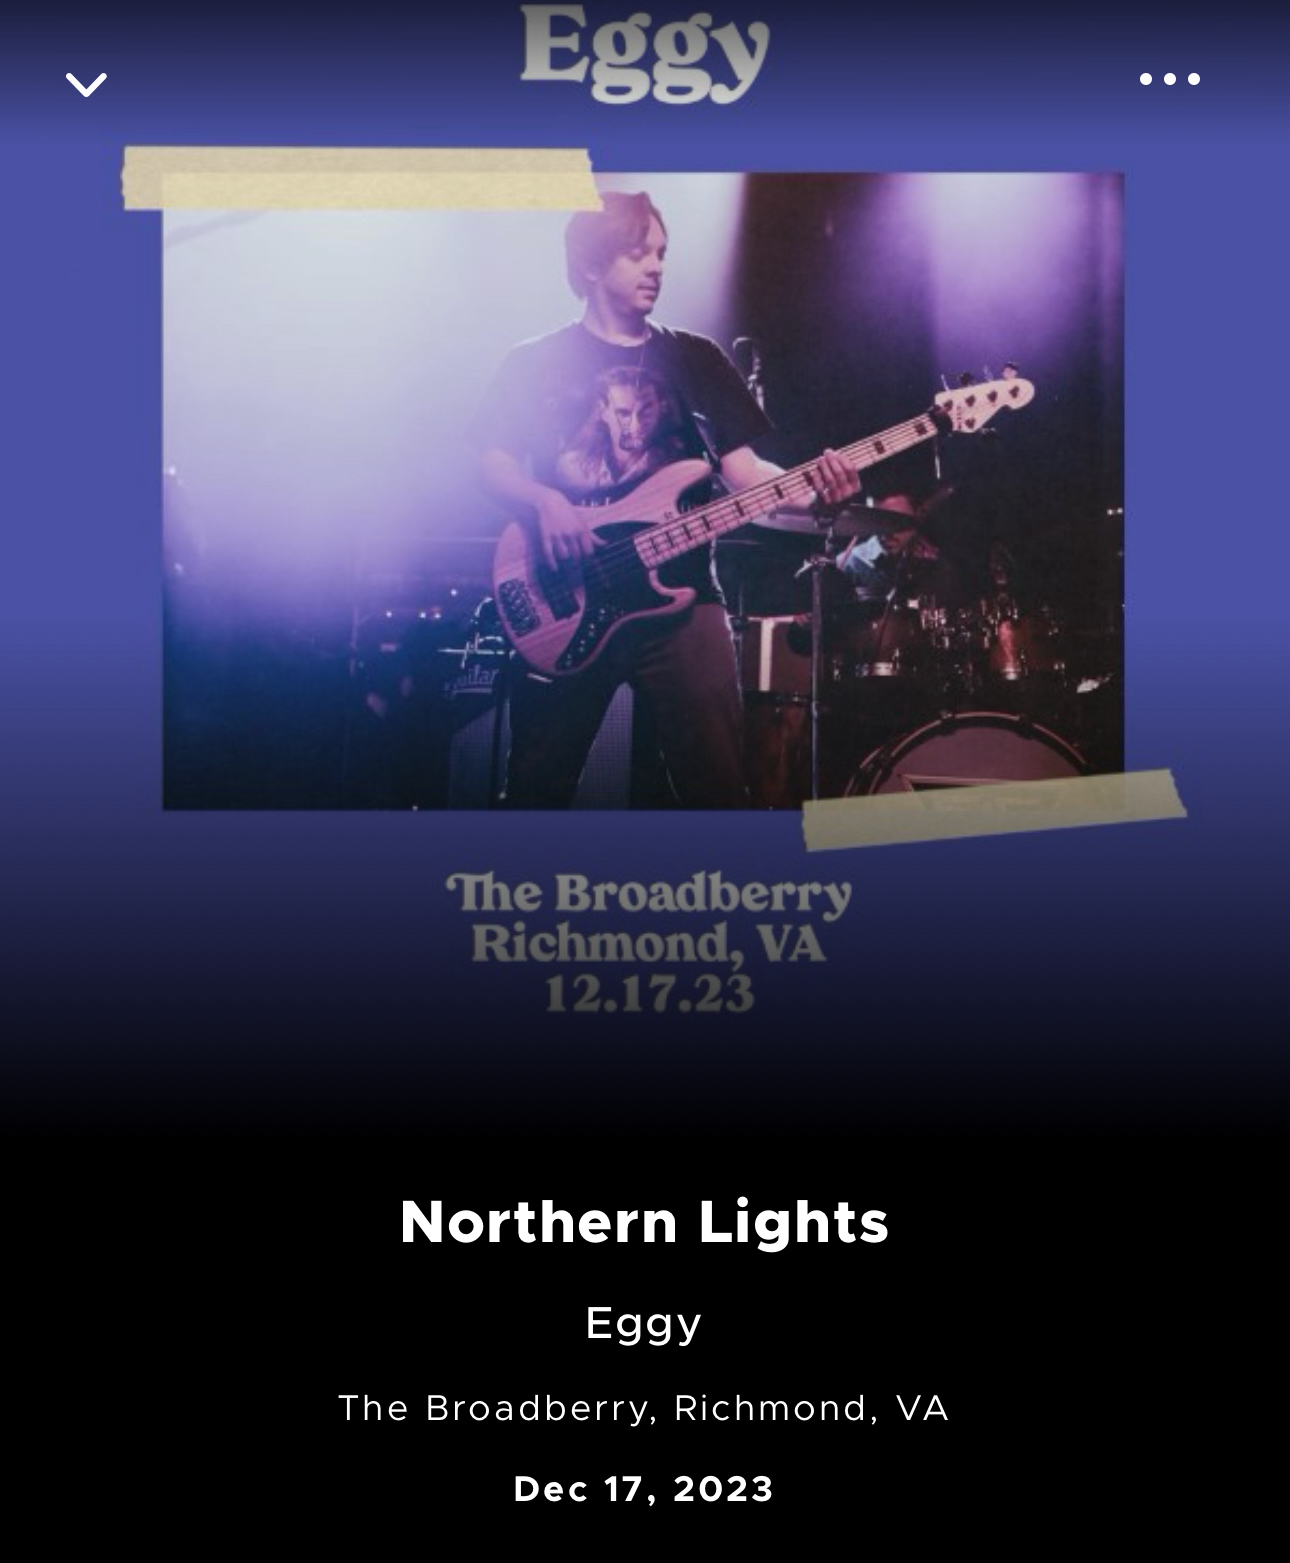 A graphic for a music performance featuring a bass guitarist on stage with the text “Eggy - Northern Lights” above and the location and date “The Broadberry, Richmond, VA - Dec 17, 2023” below.